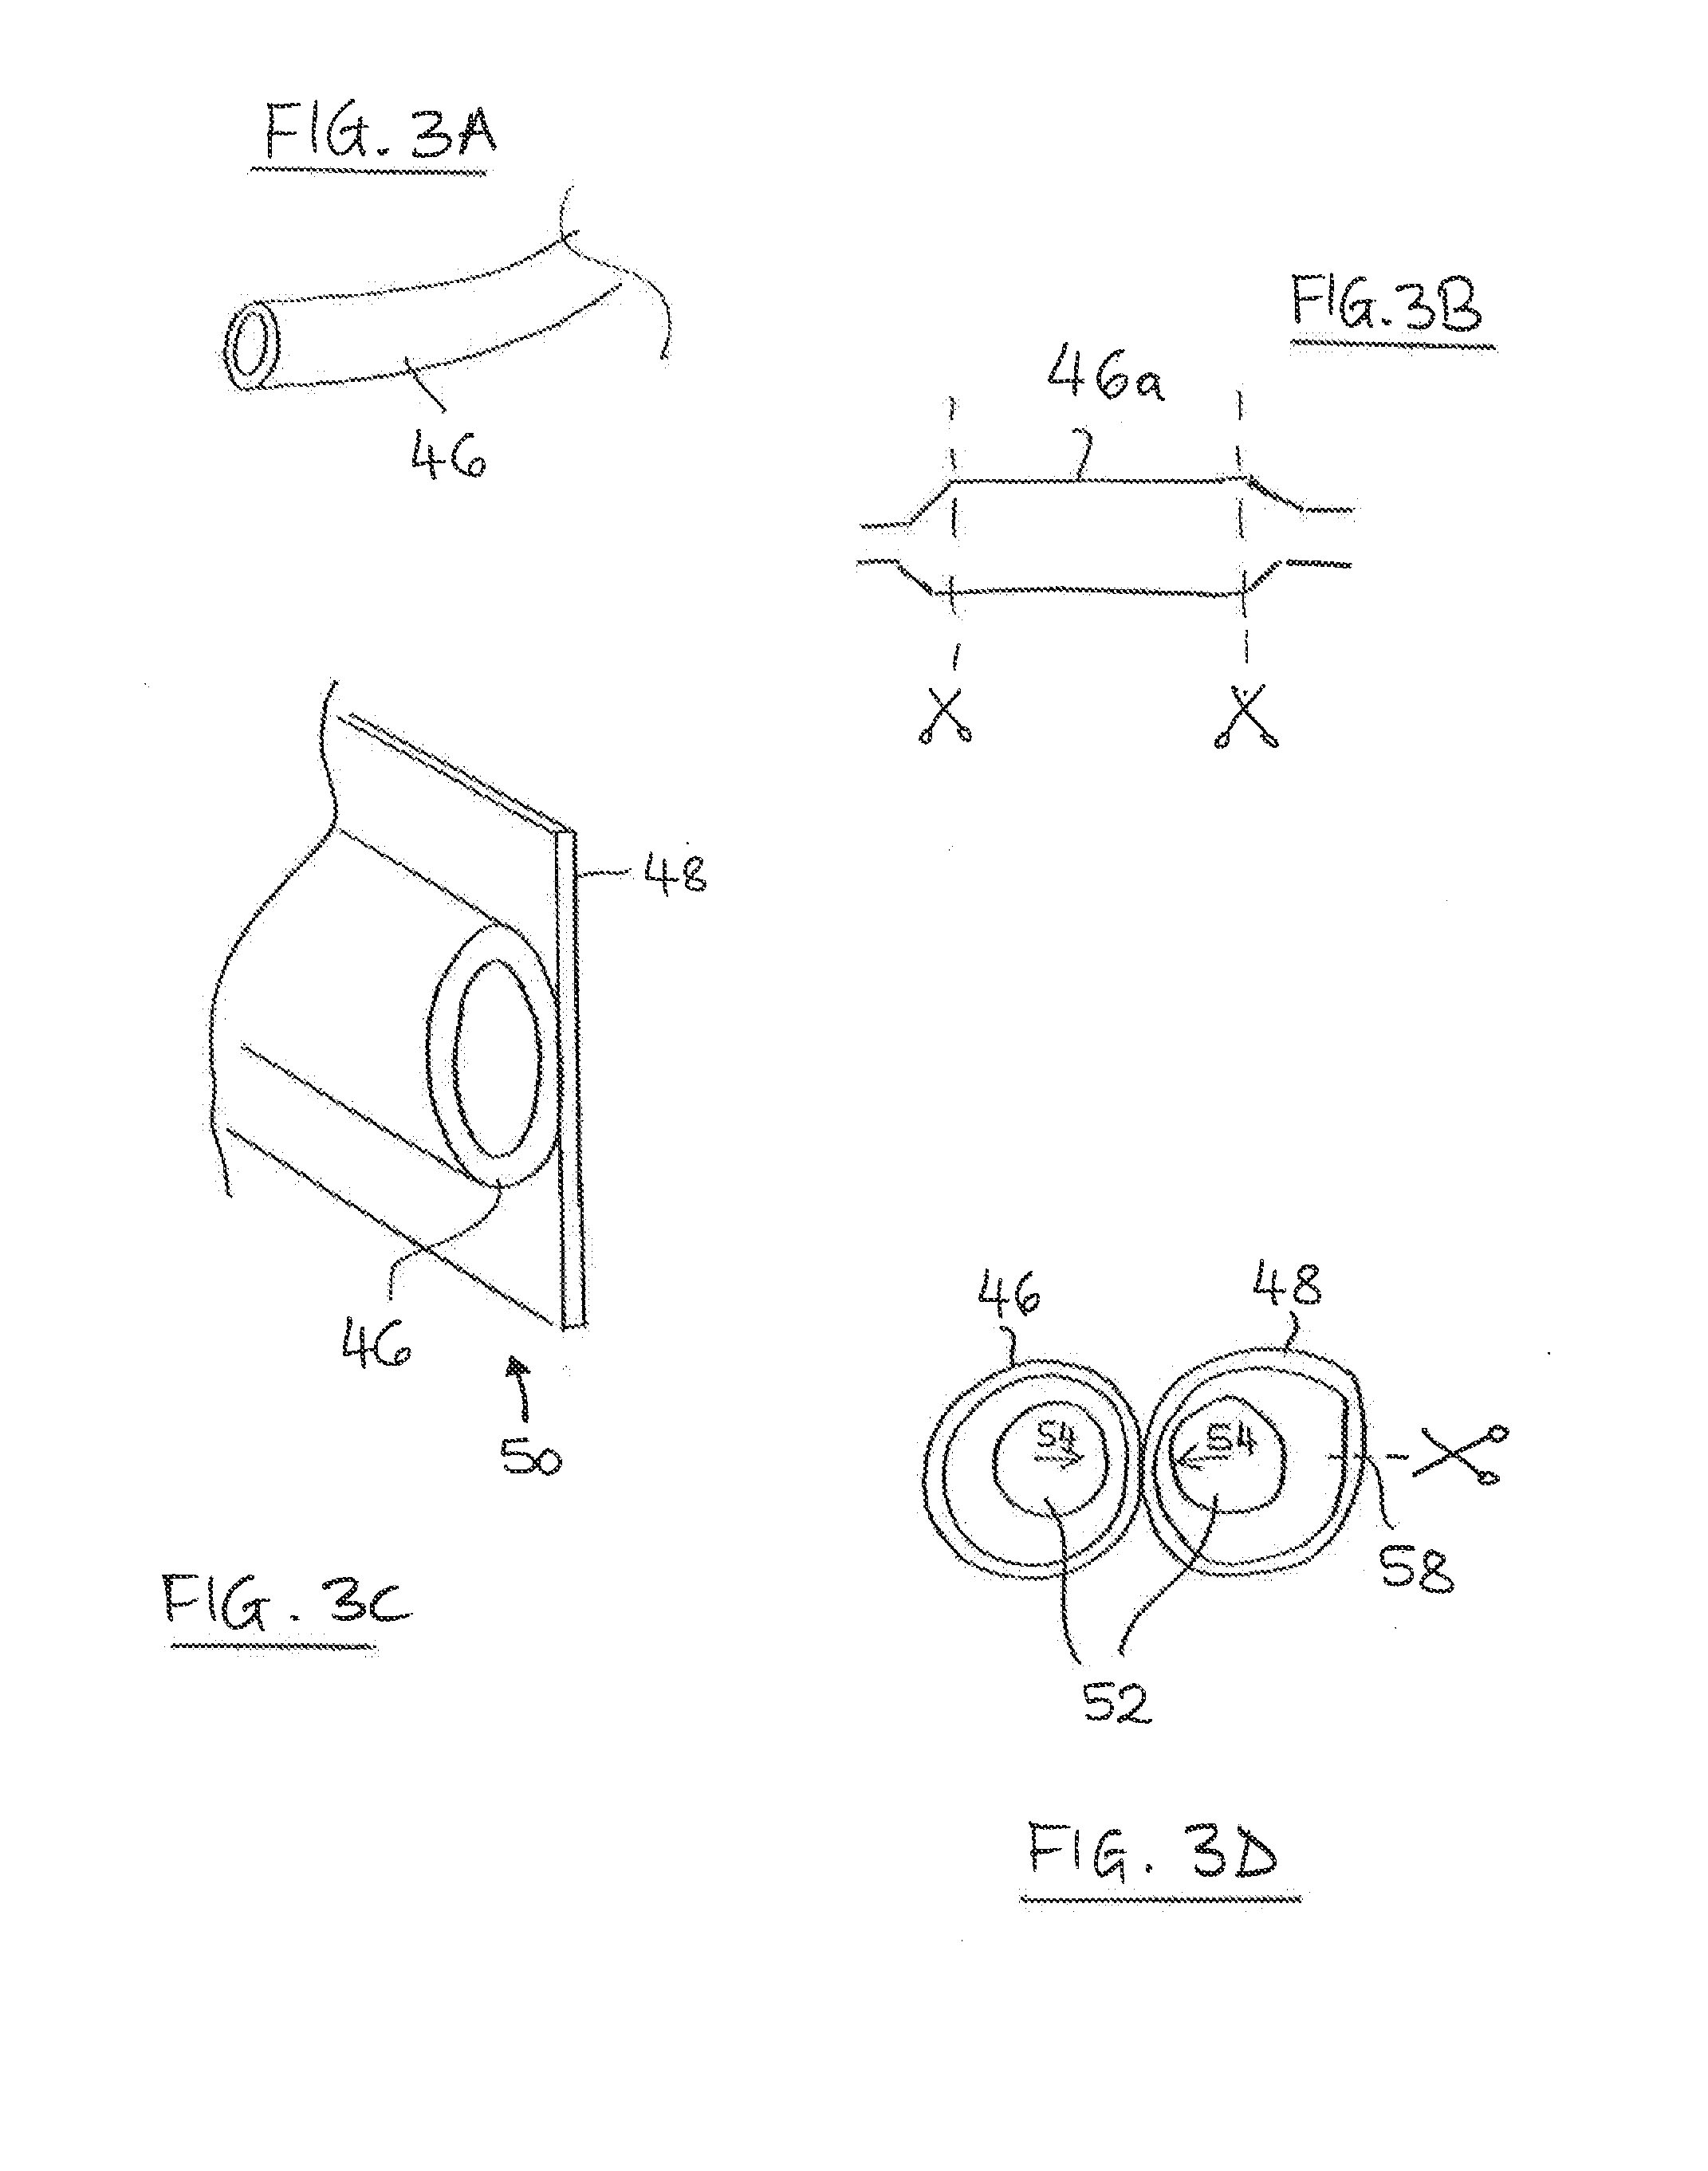 Prosthesis Seals and Methods for Sealing an Expandable Prosthesis